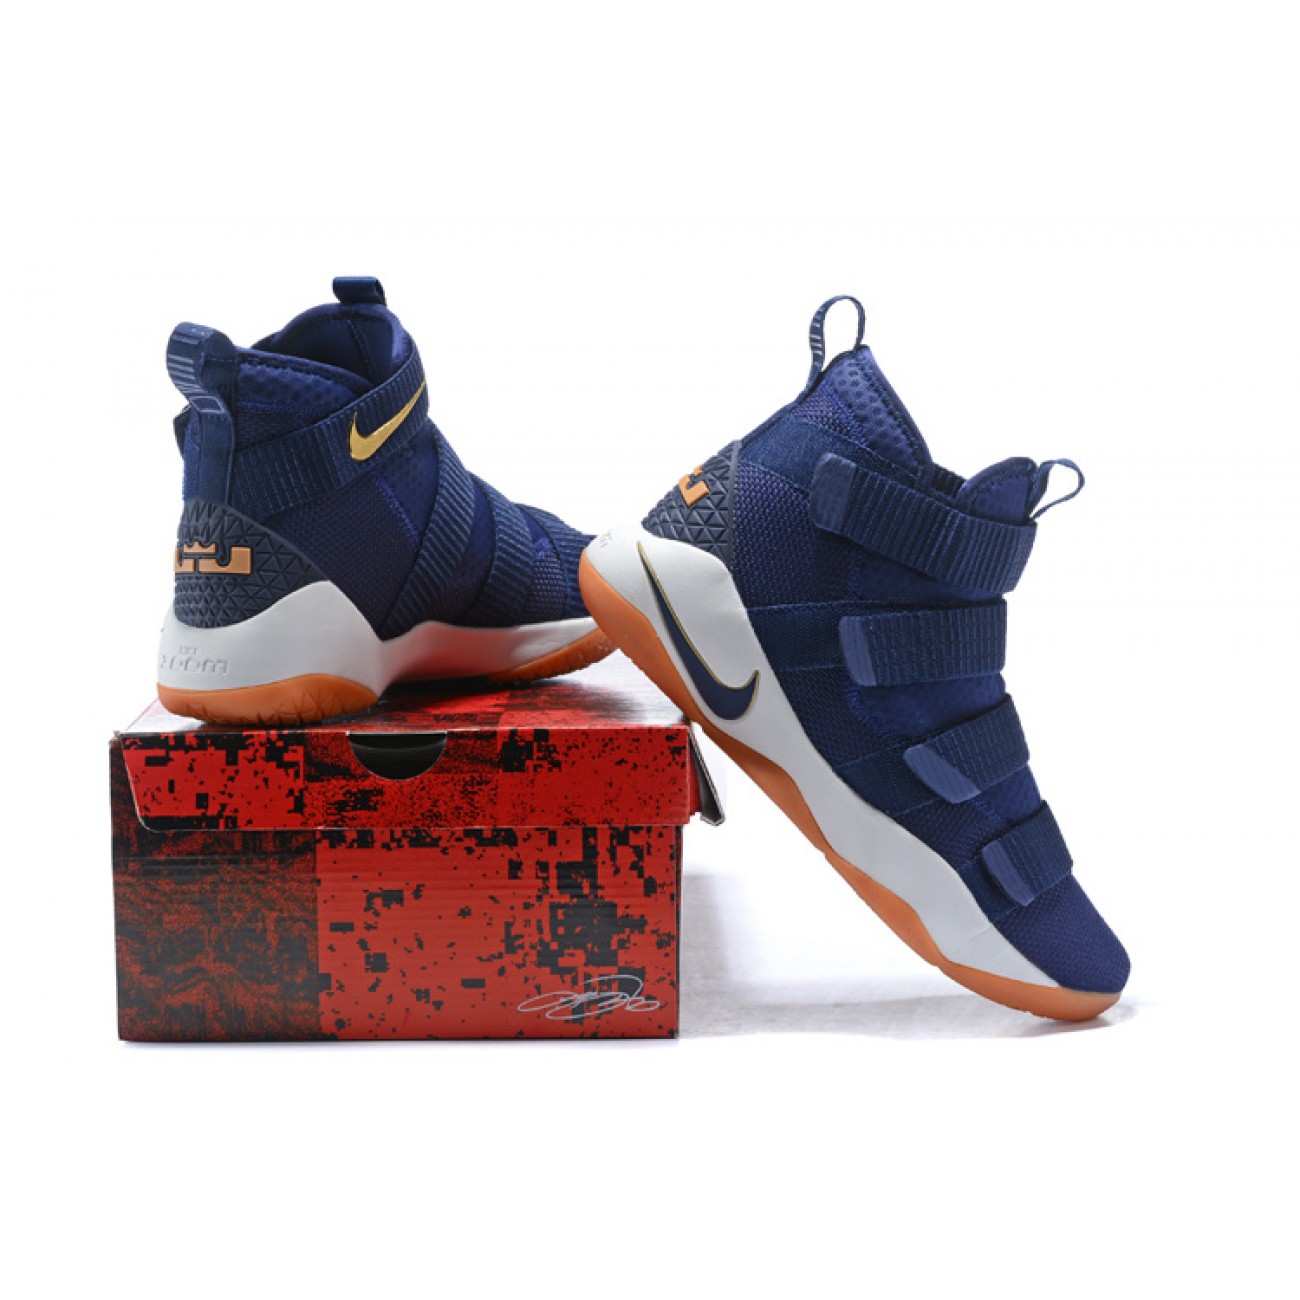 Lebron Soldier 11 "The Cavaliers" Deep Blue/White